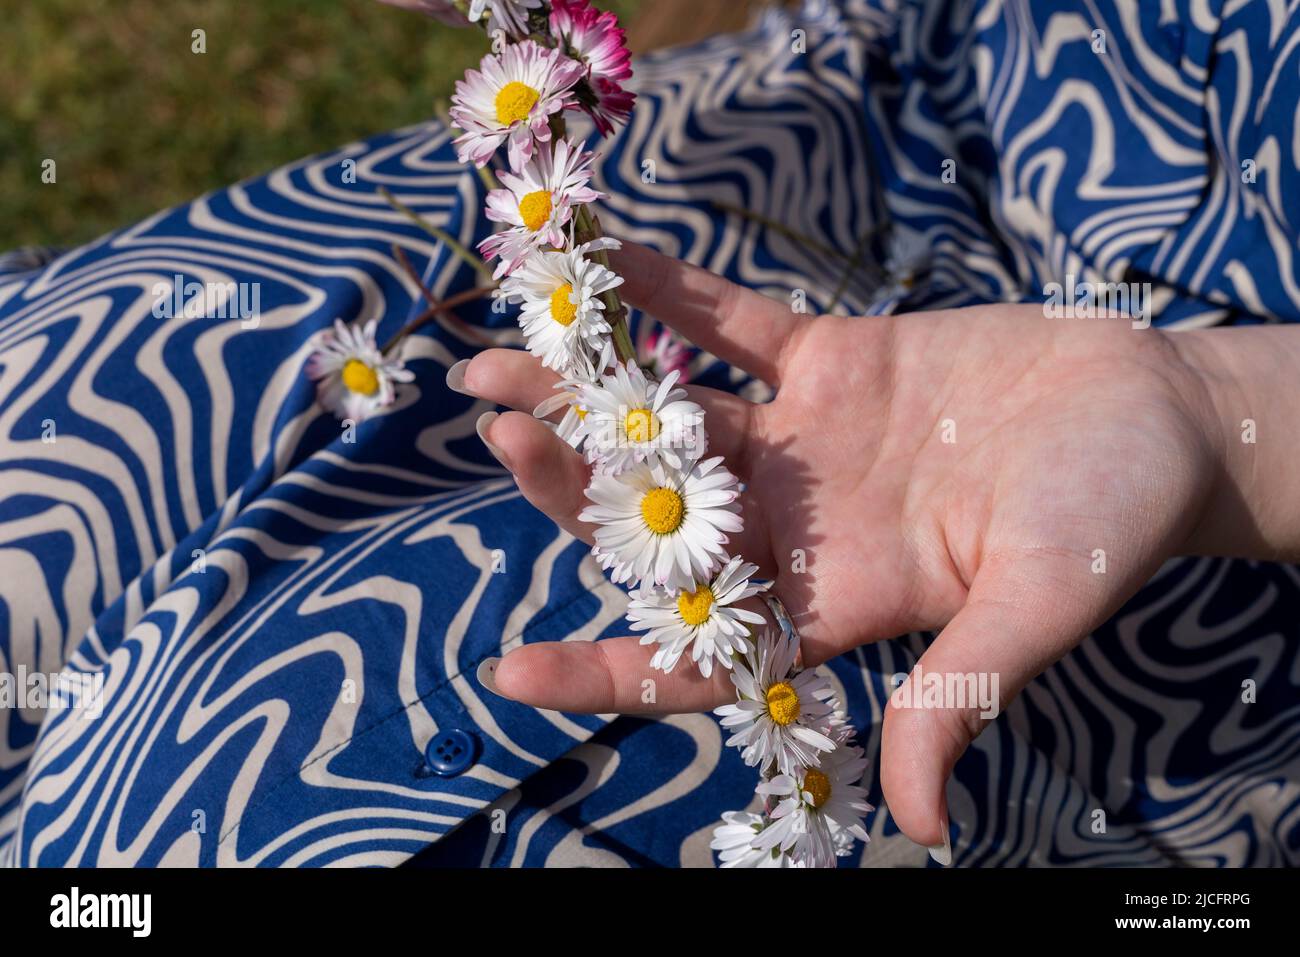 A young woman weaves a flower wreath from daisies. Stock Photo